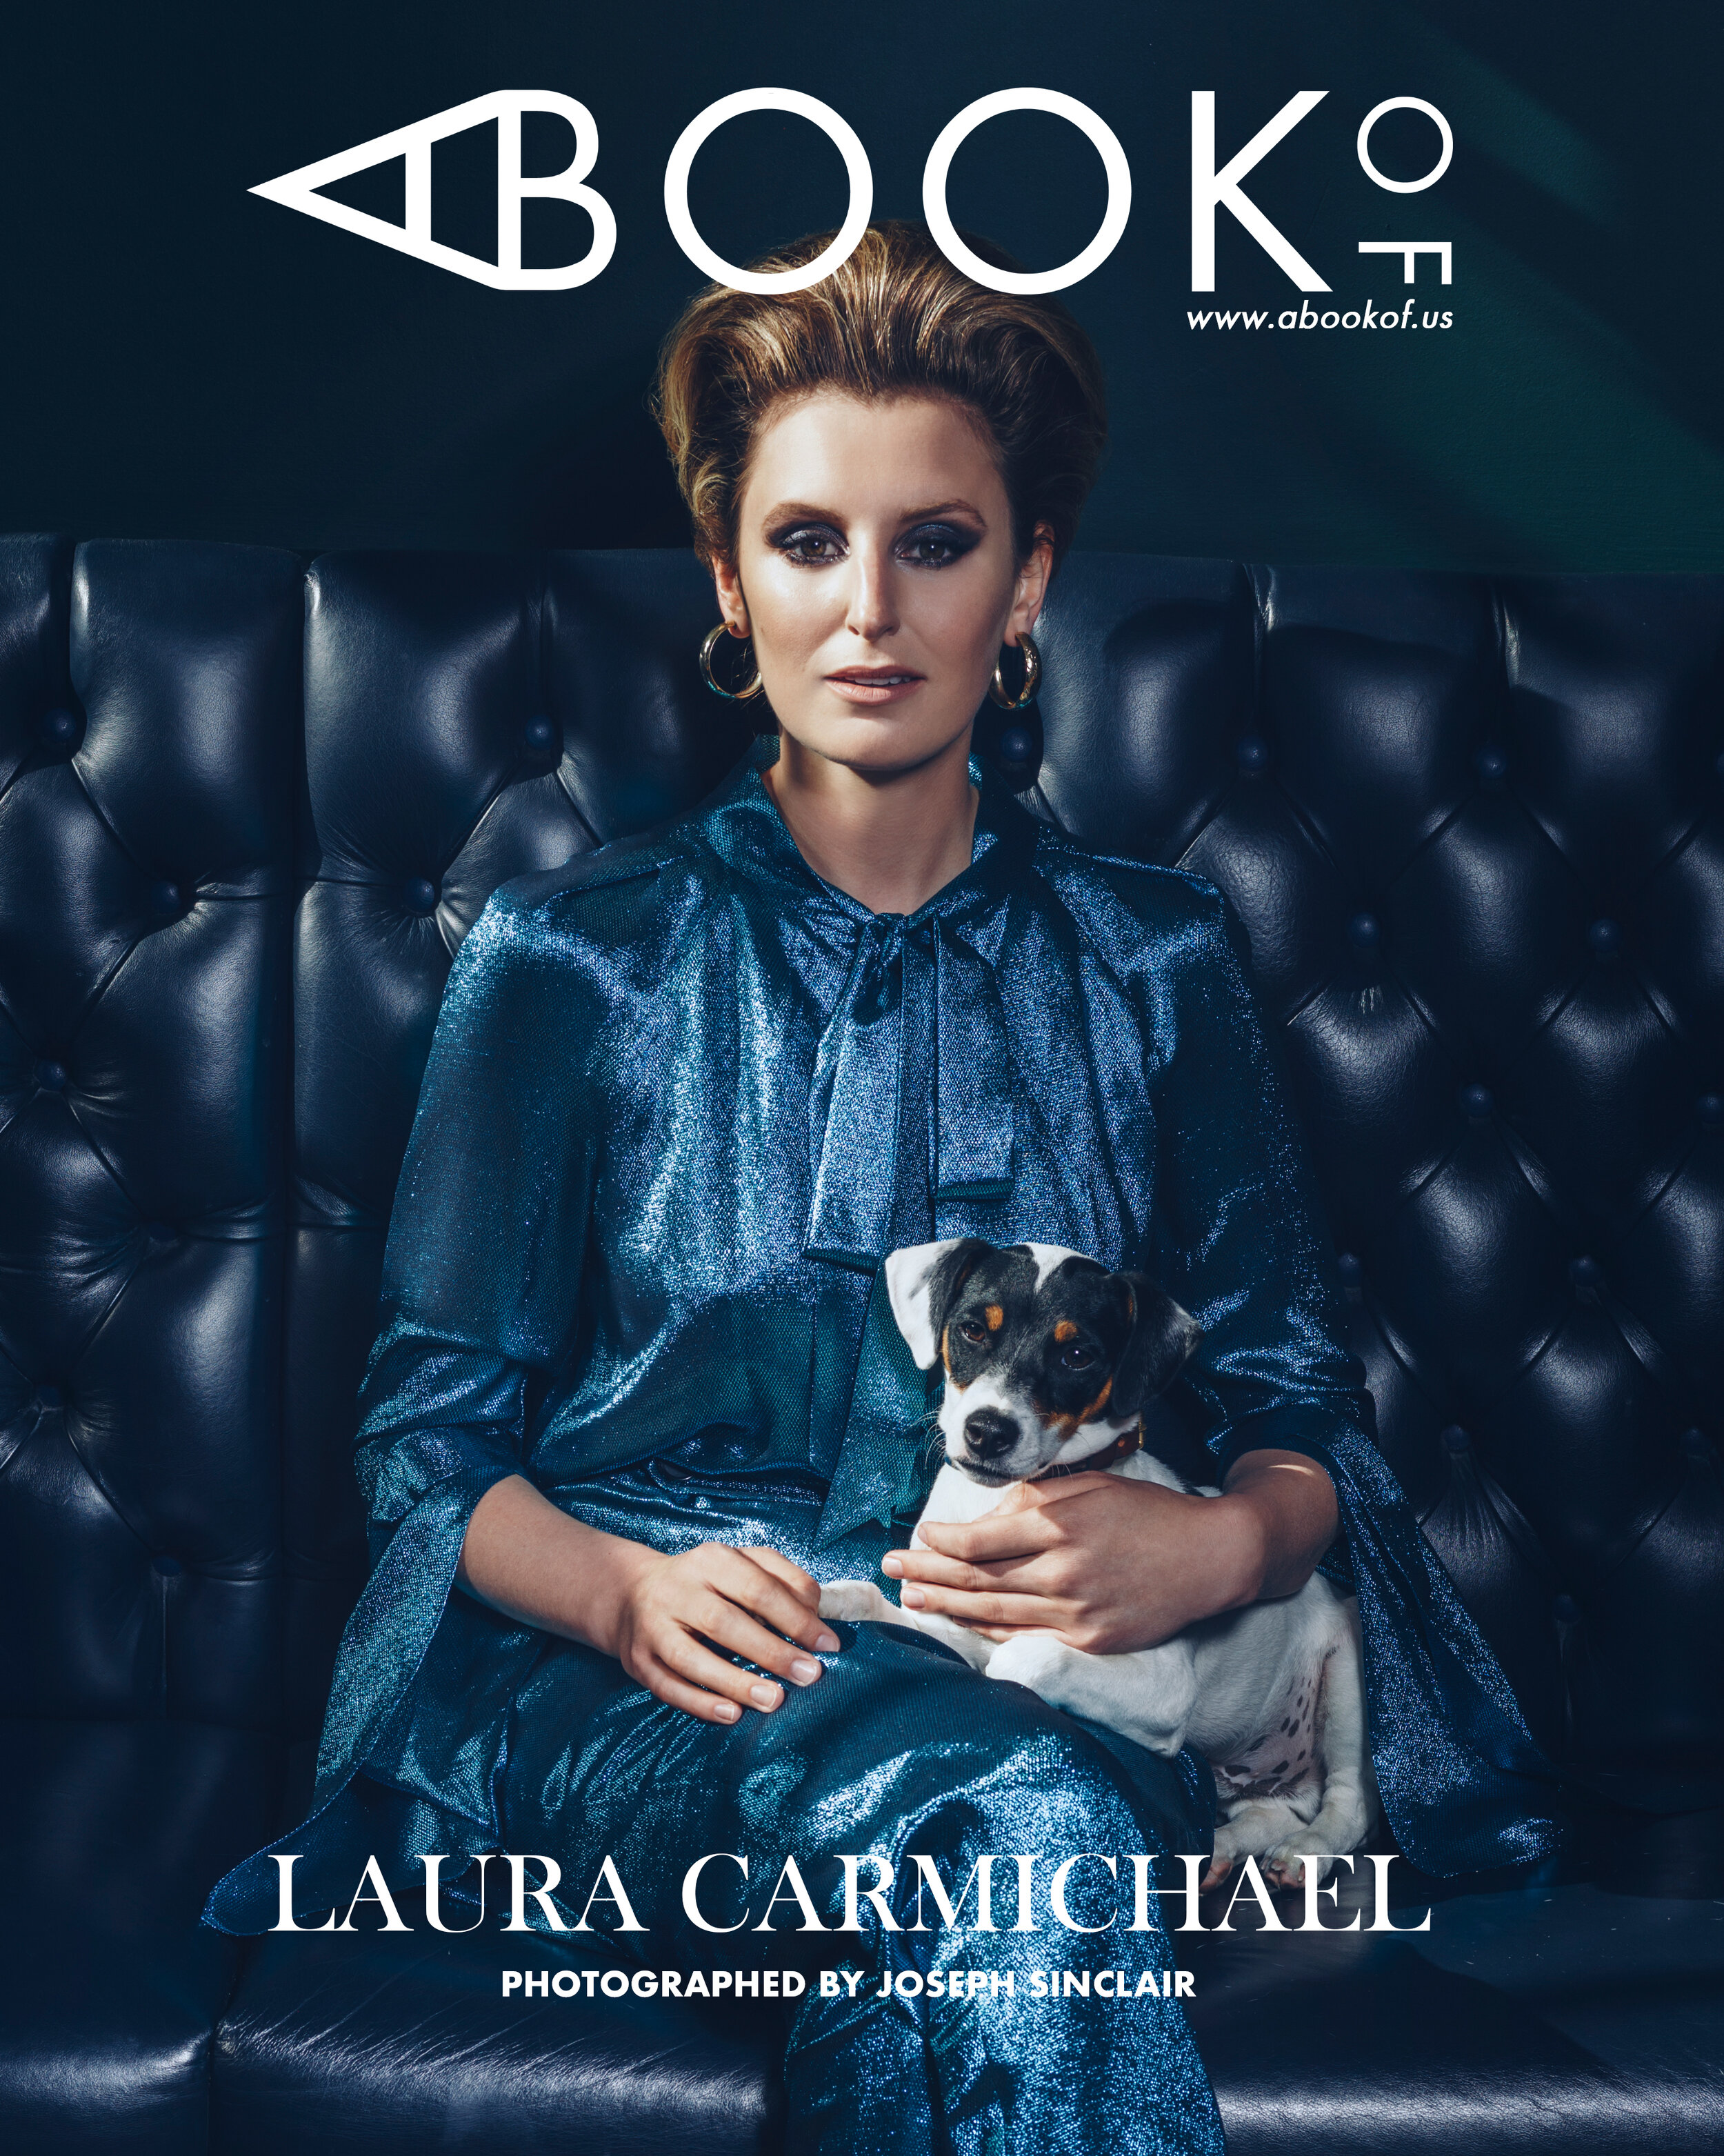 Actress Laura Carmichael magazine cover personal styling by Ella Gaskell